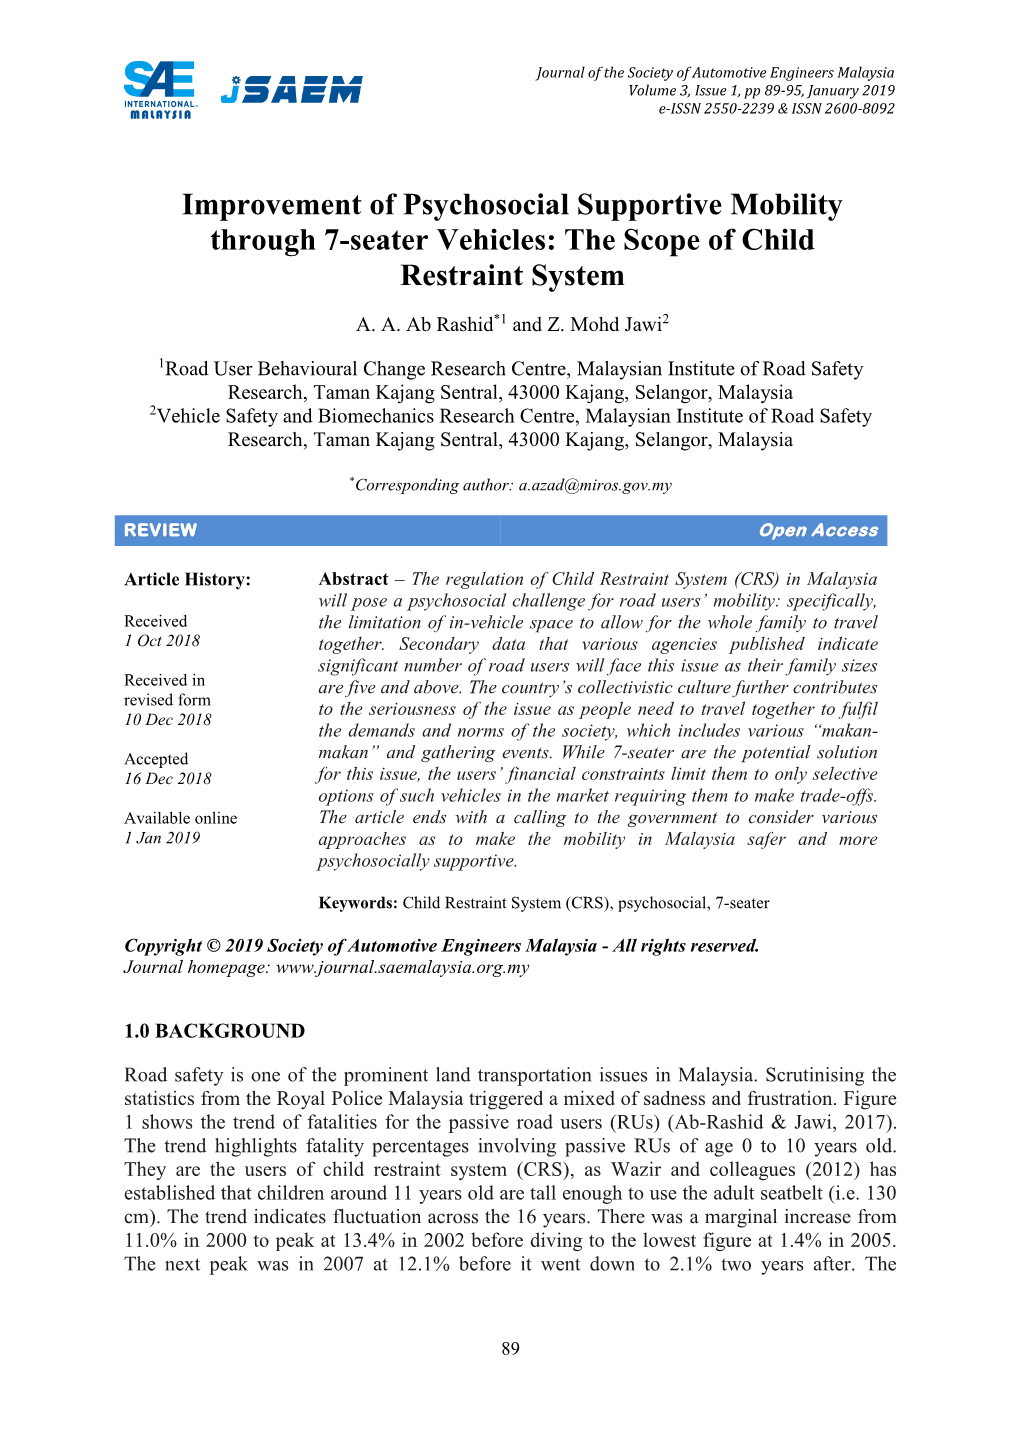 Improvement of Psychosocial Supportive Mobility Through 7-Seater Vehicles: the Scope of Child Restraint System